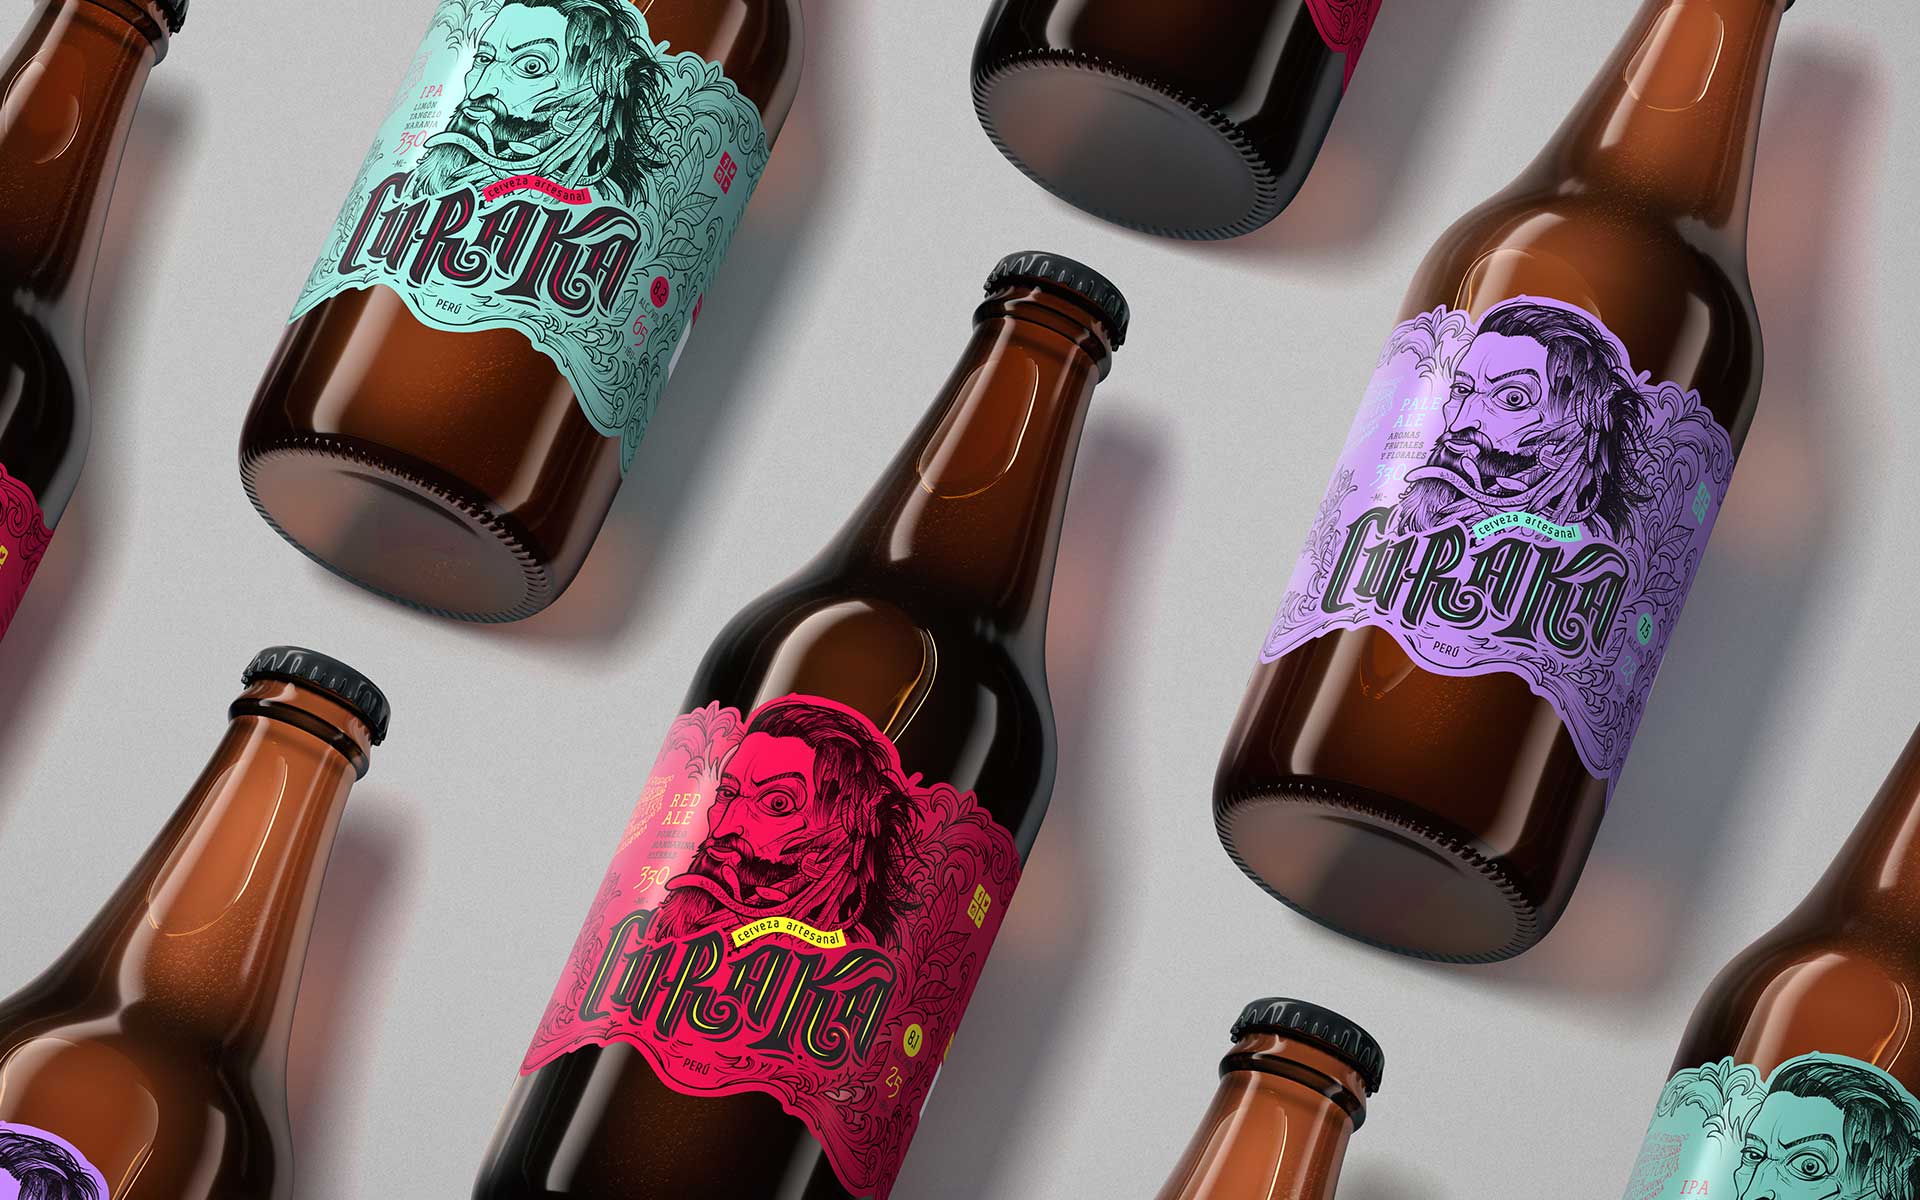 New Brand and Label Design for a Craft Beer in Lima, Perú